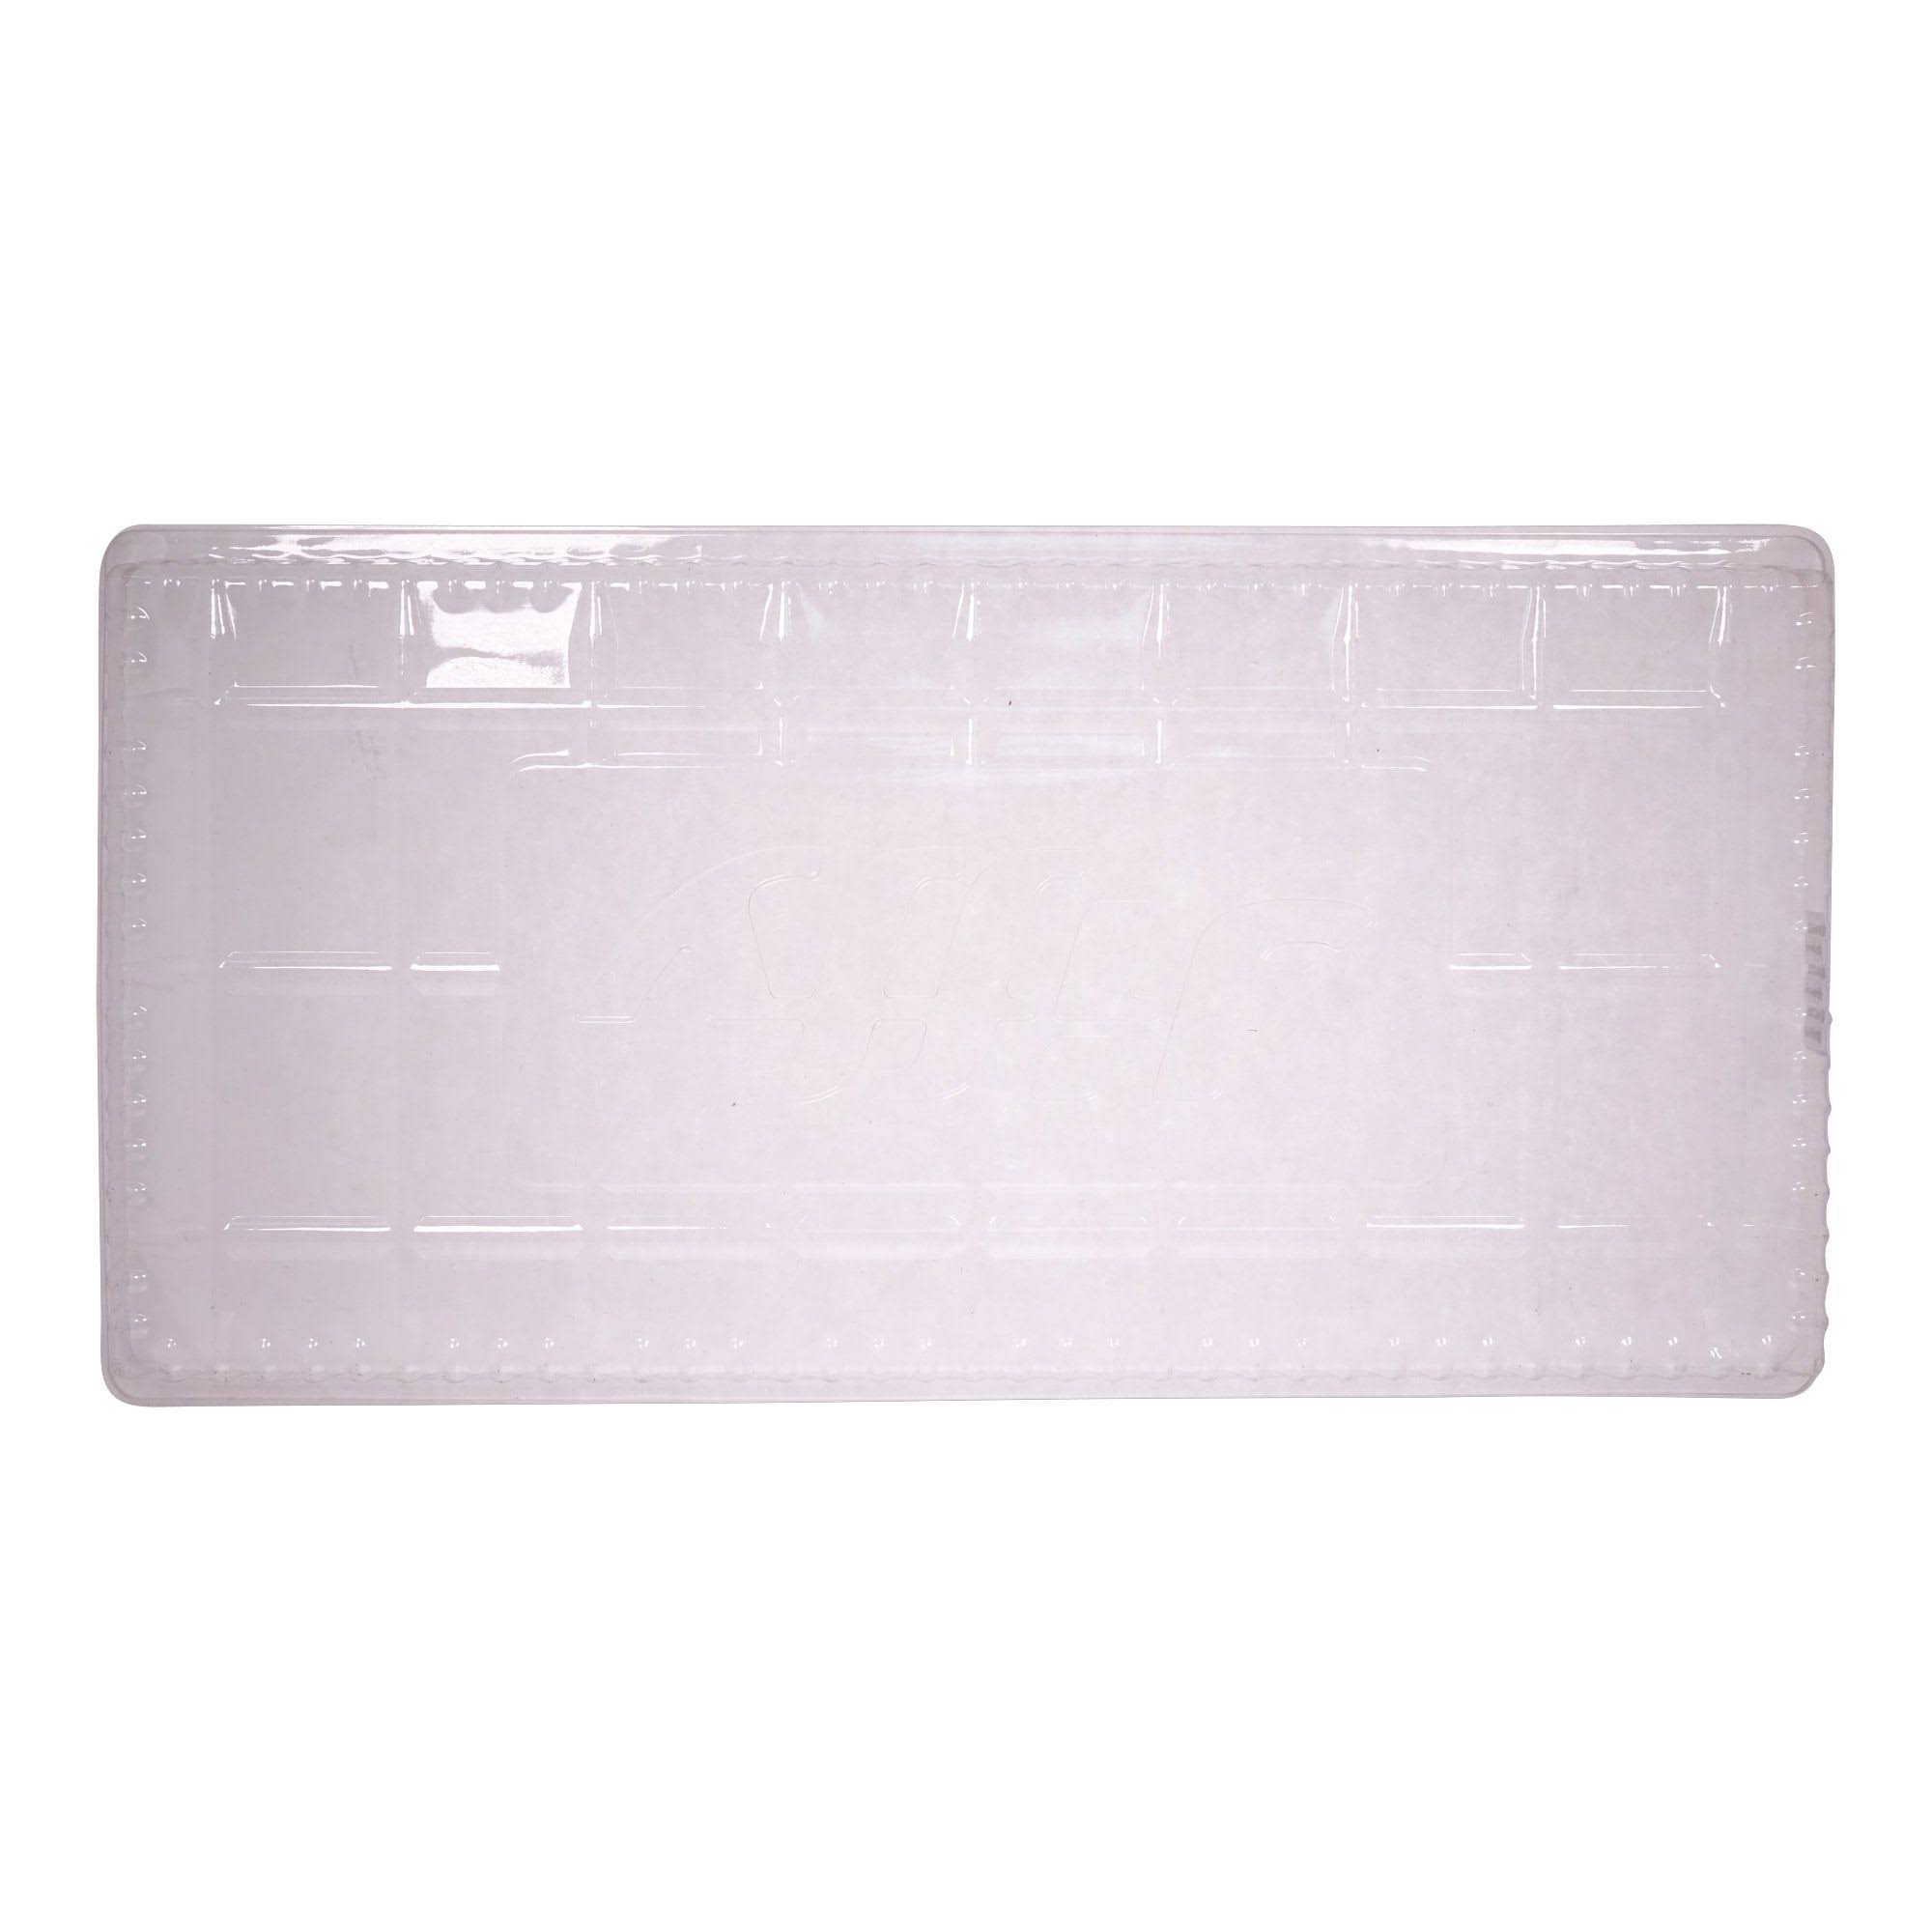 Jiffy Products of America 5221 Plant Tray Cover - 11" x 22"